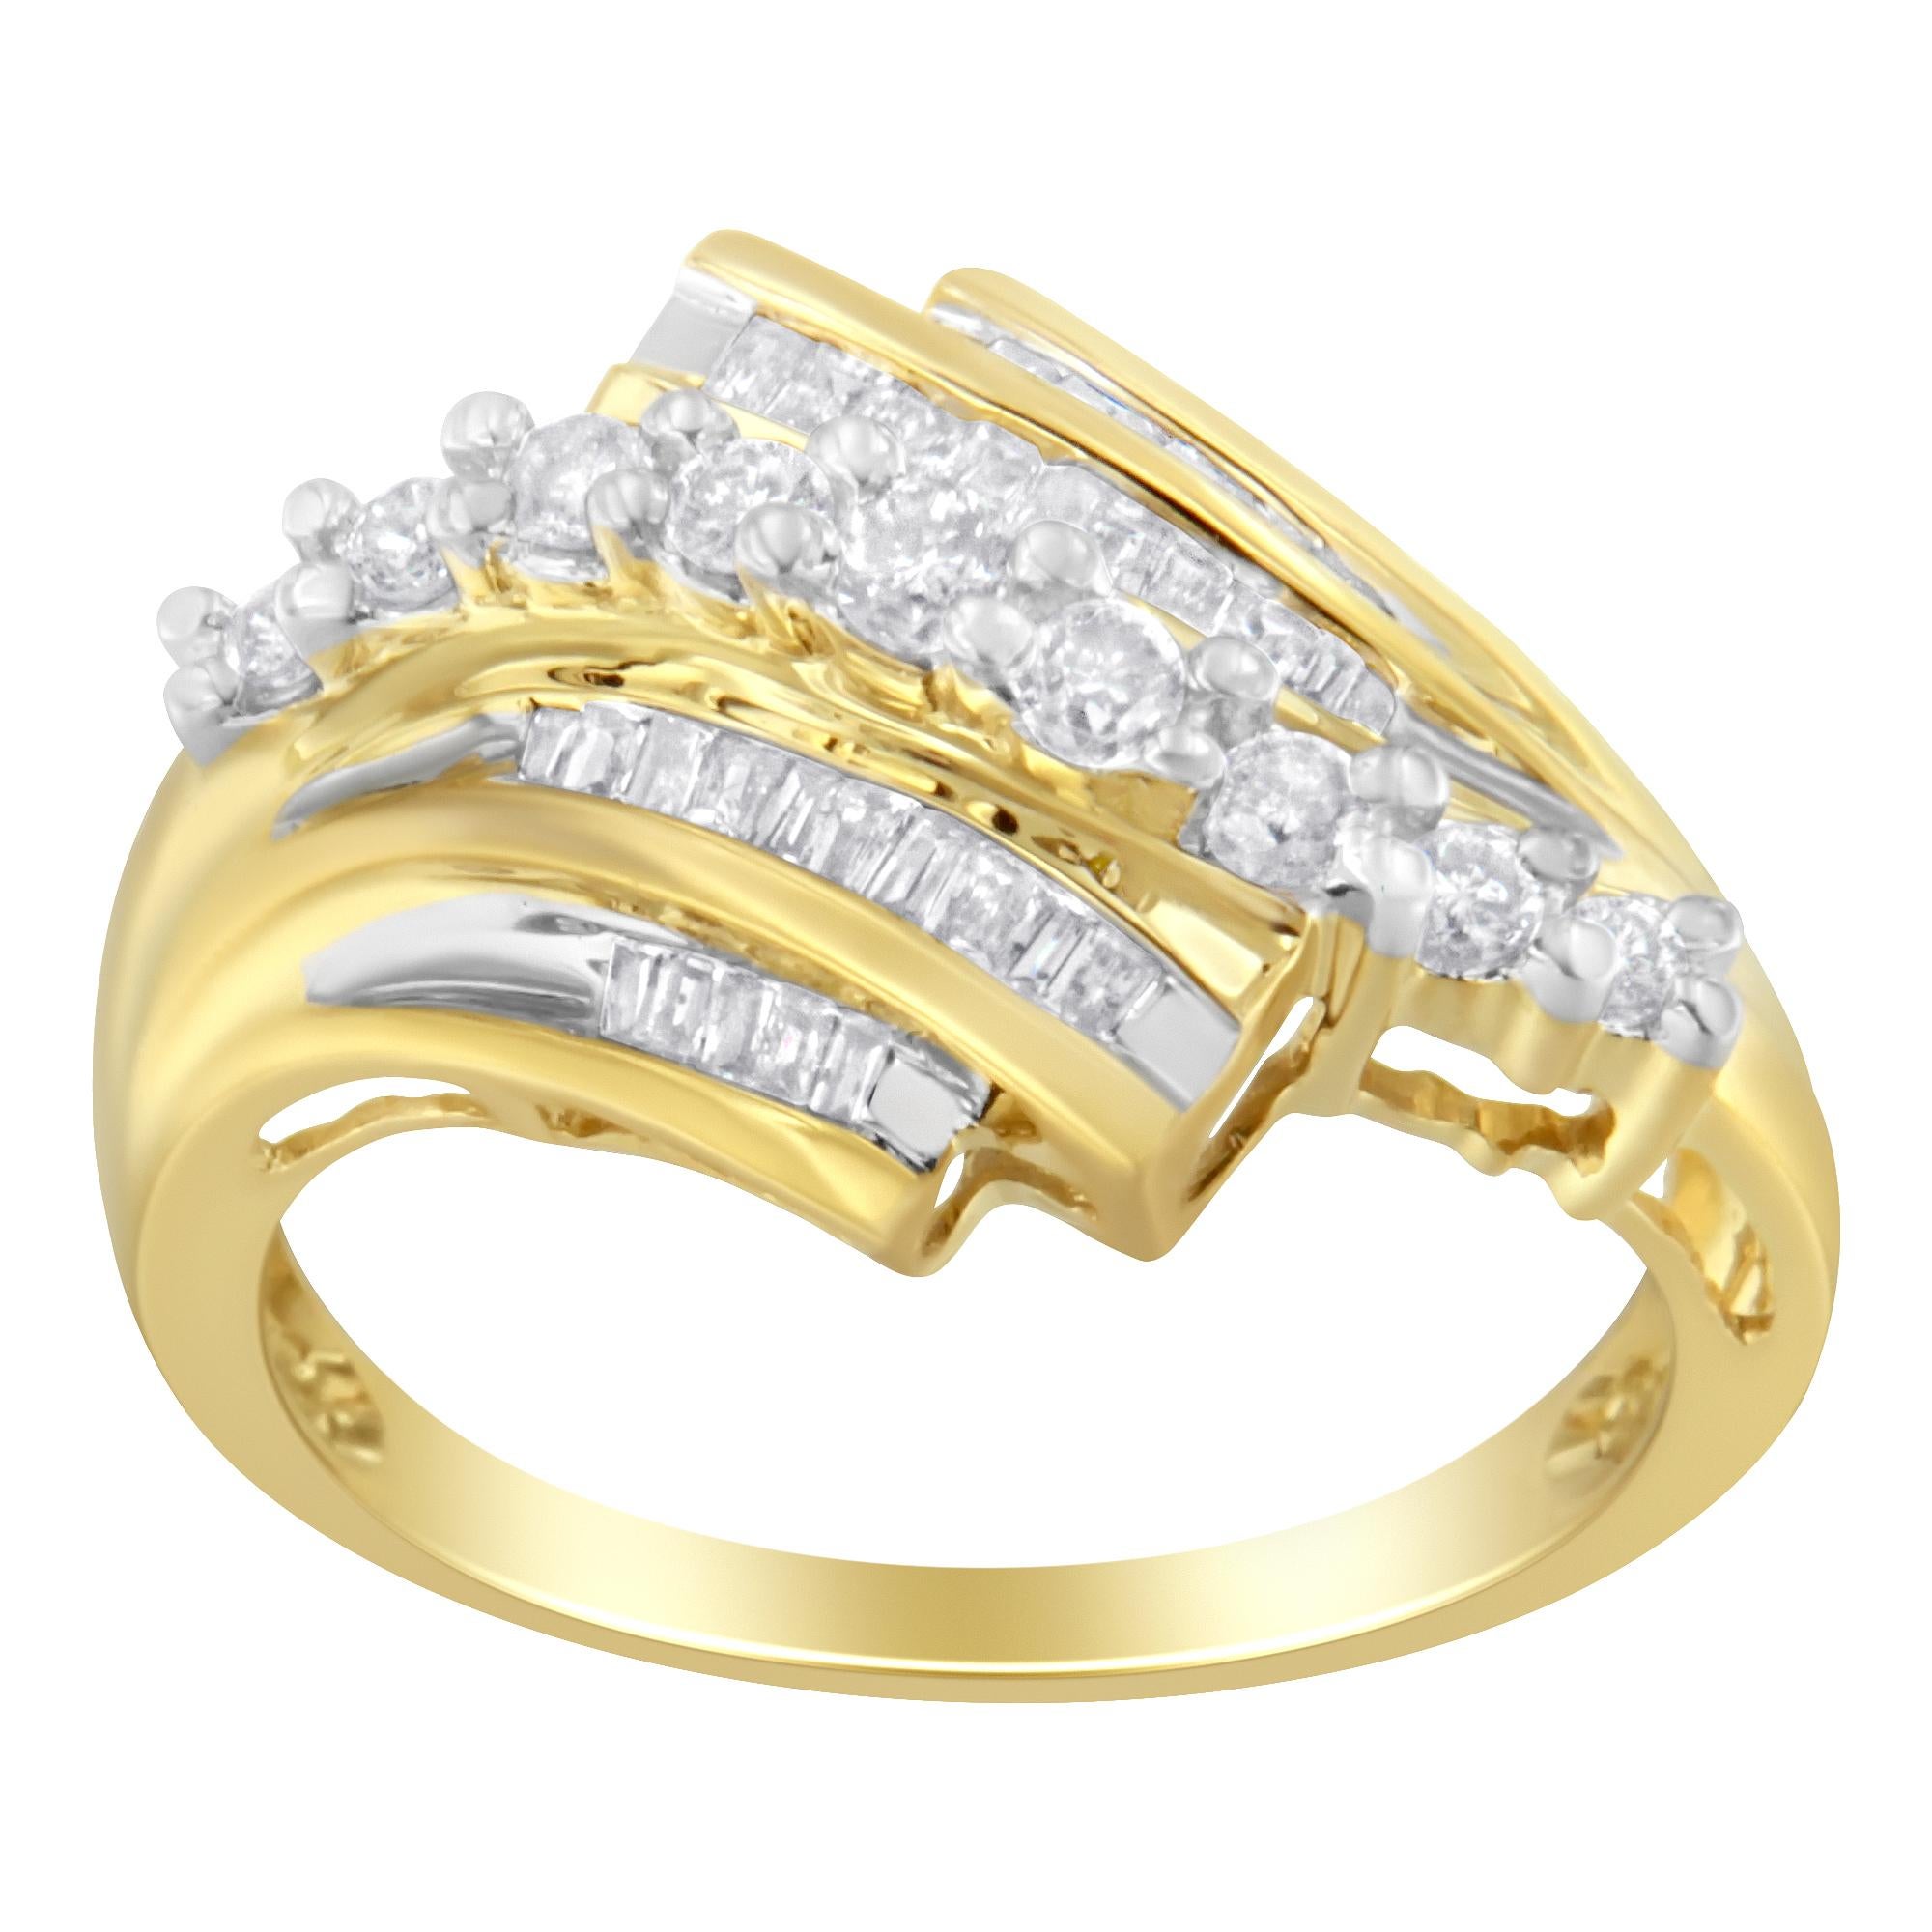 Make a unique style statement in front of your special guests by wearing this outstanding diamond ring. Fashioned in 10kt yellow gold, this diamond ring is enriched with round, and baguette cut diamonds arranged in prong settings. Its glimmering